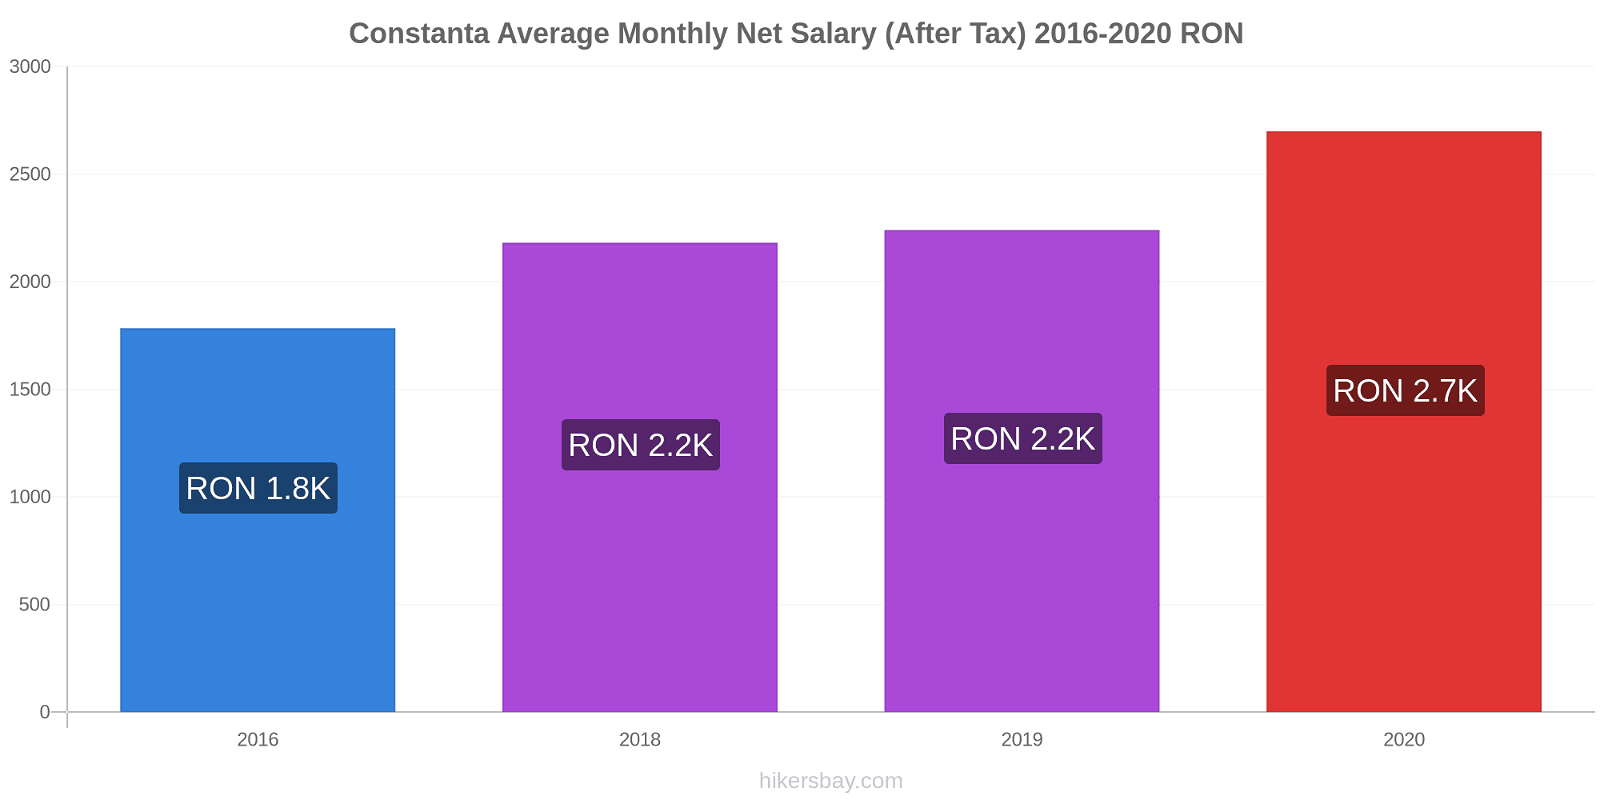 Constanta price changes Average Monthly Net Salary (After Tax) hikersbay.com